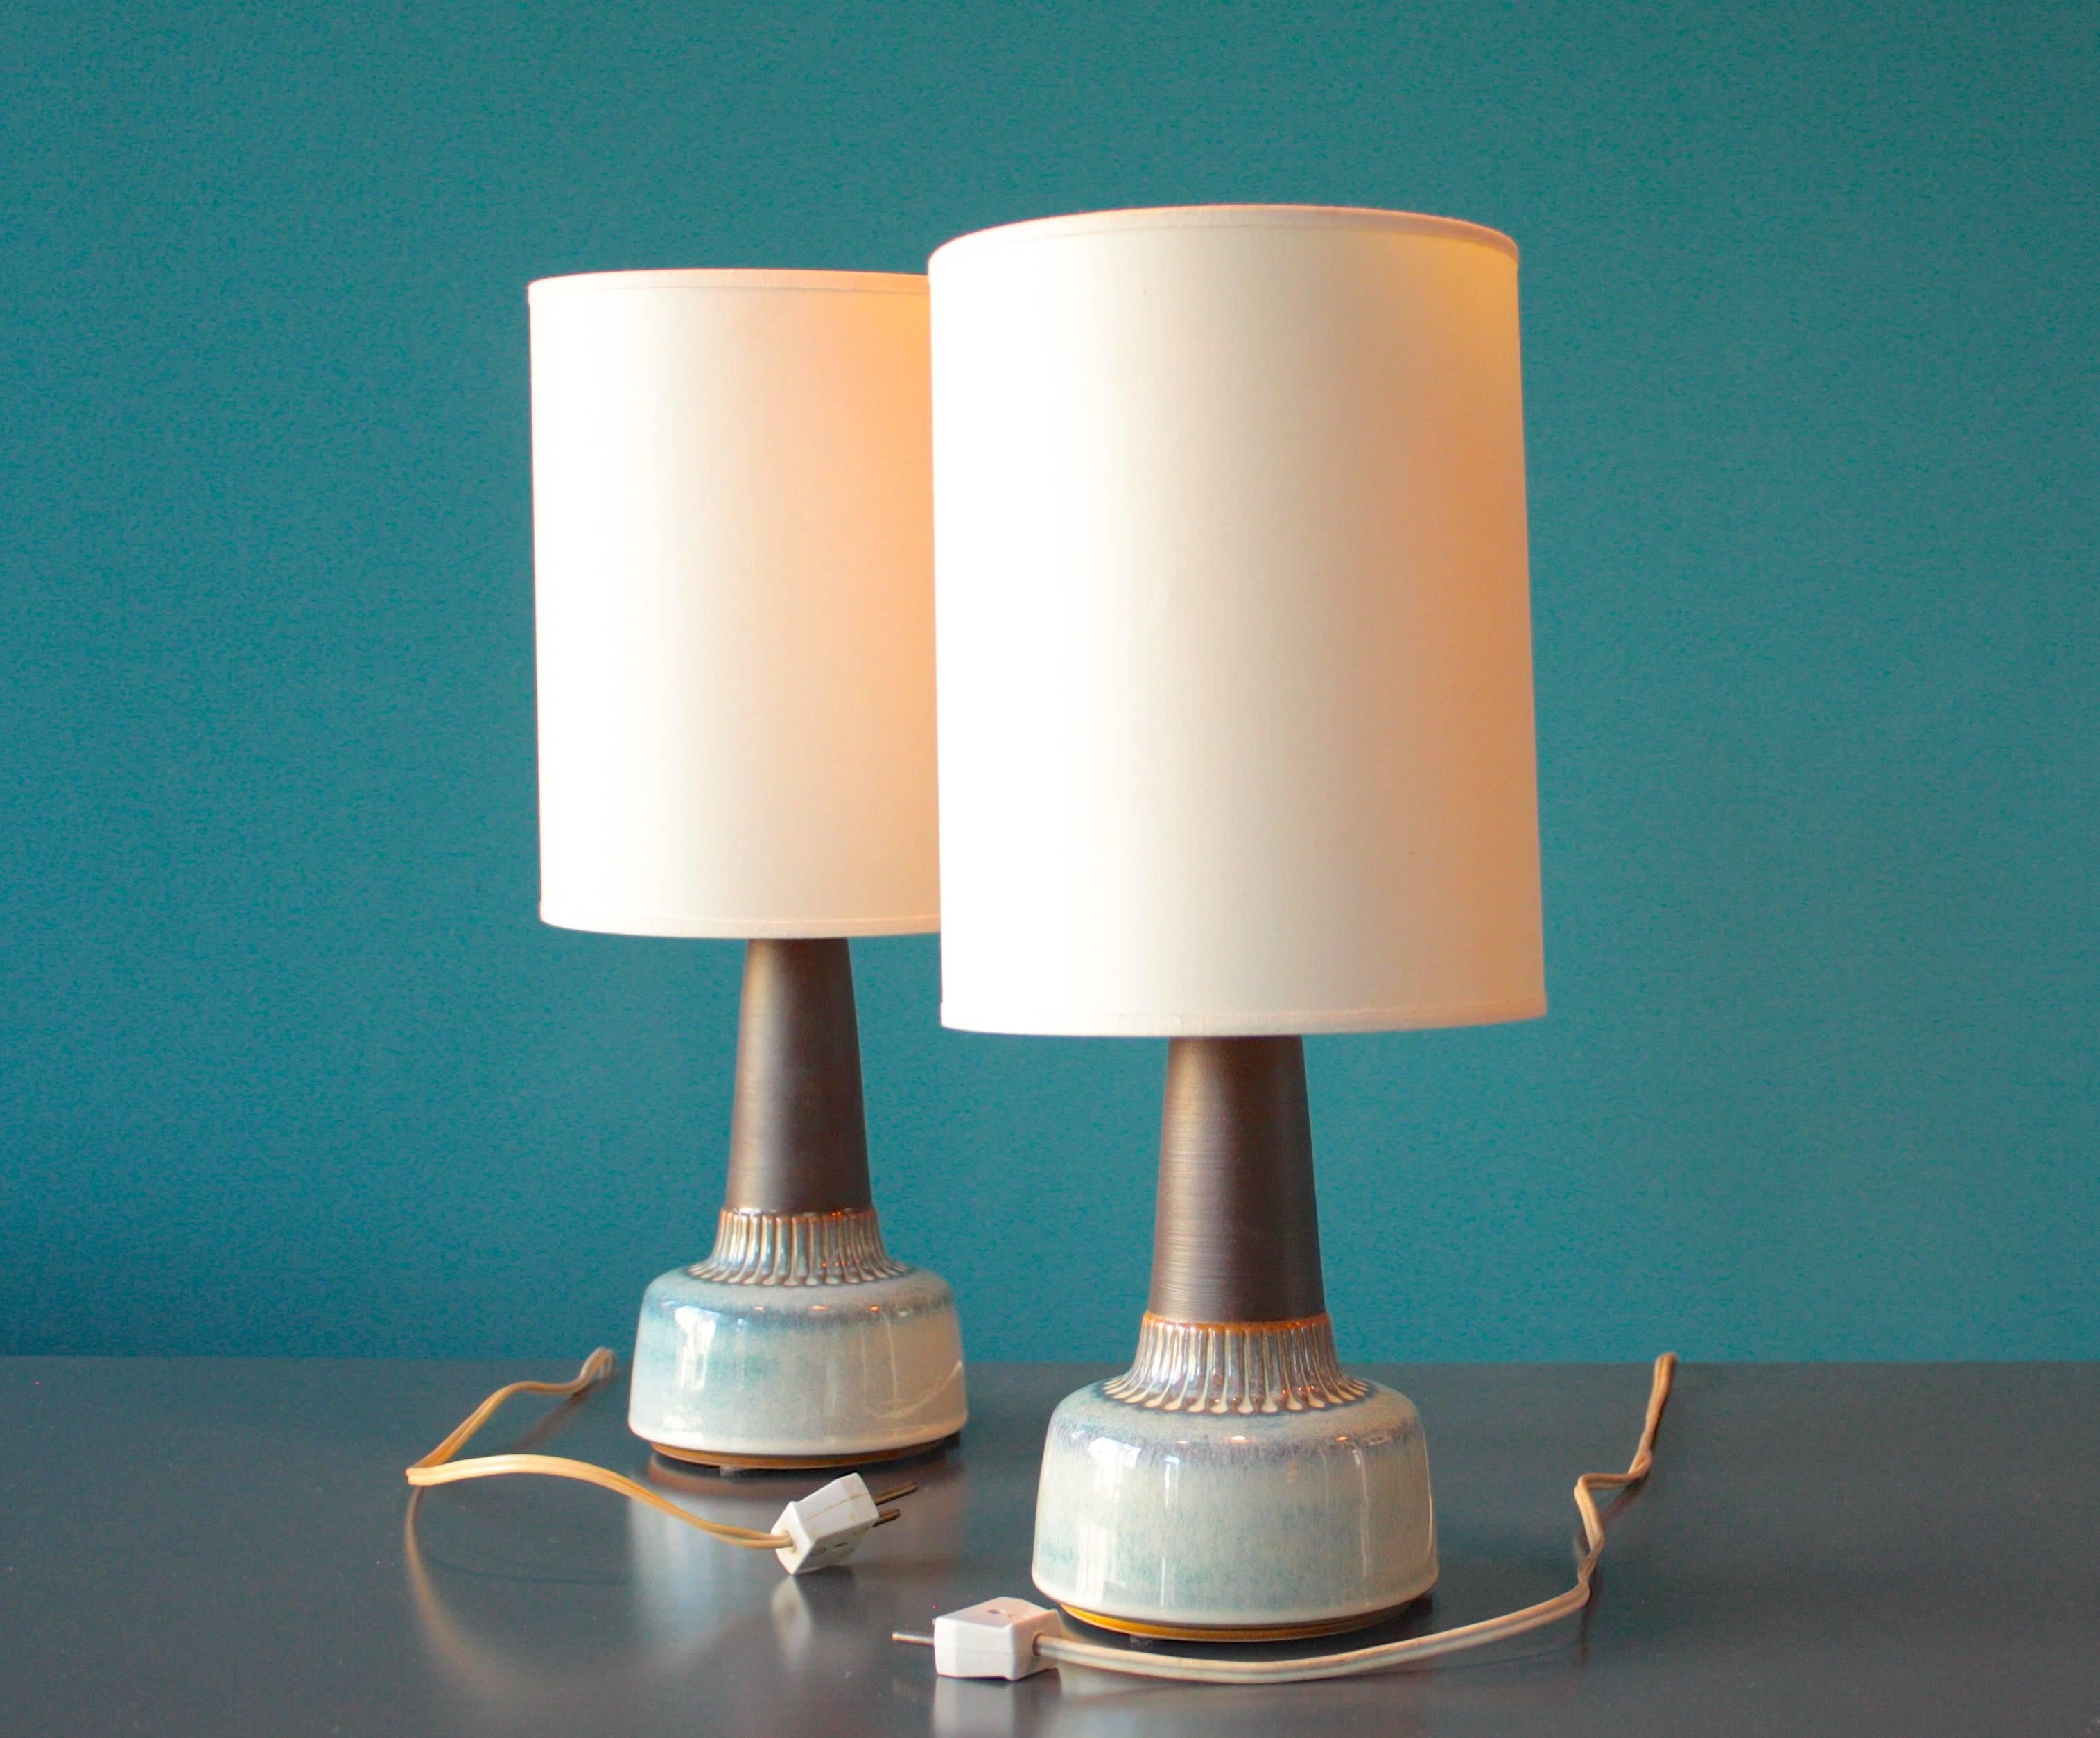 This pair of Mid-Century table lamps was manufactured in Denmark by Soholm, during the 1960s. The frames are made from porcelain and the shades from white fabric. One of the lamps is two centimeters smaller than the other one. This set remains in a